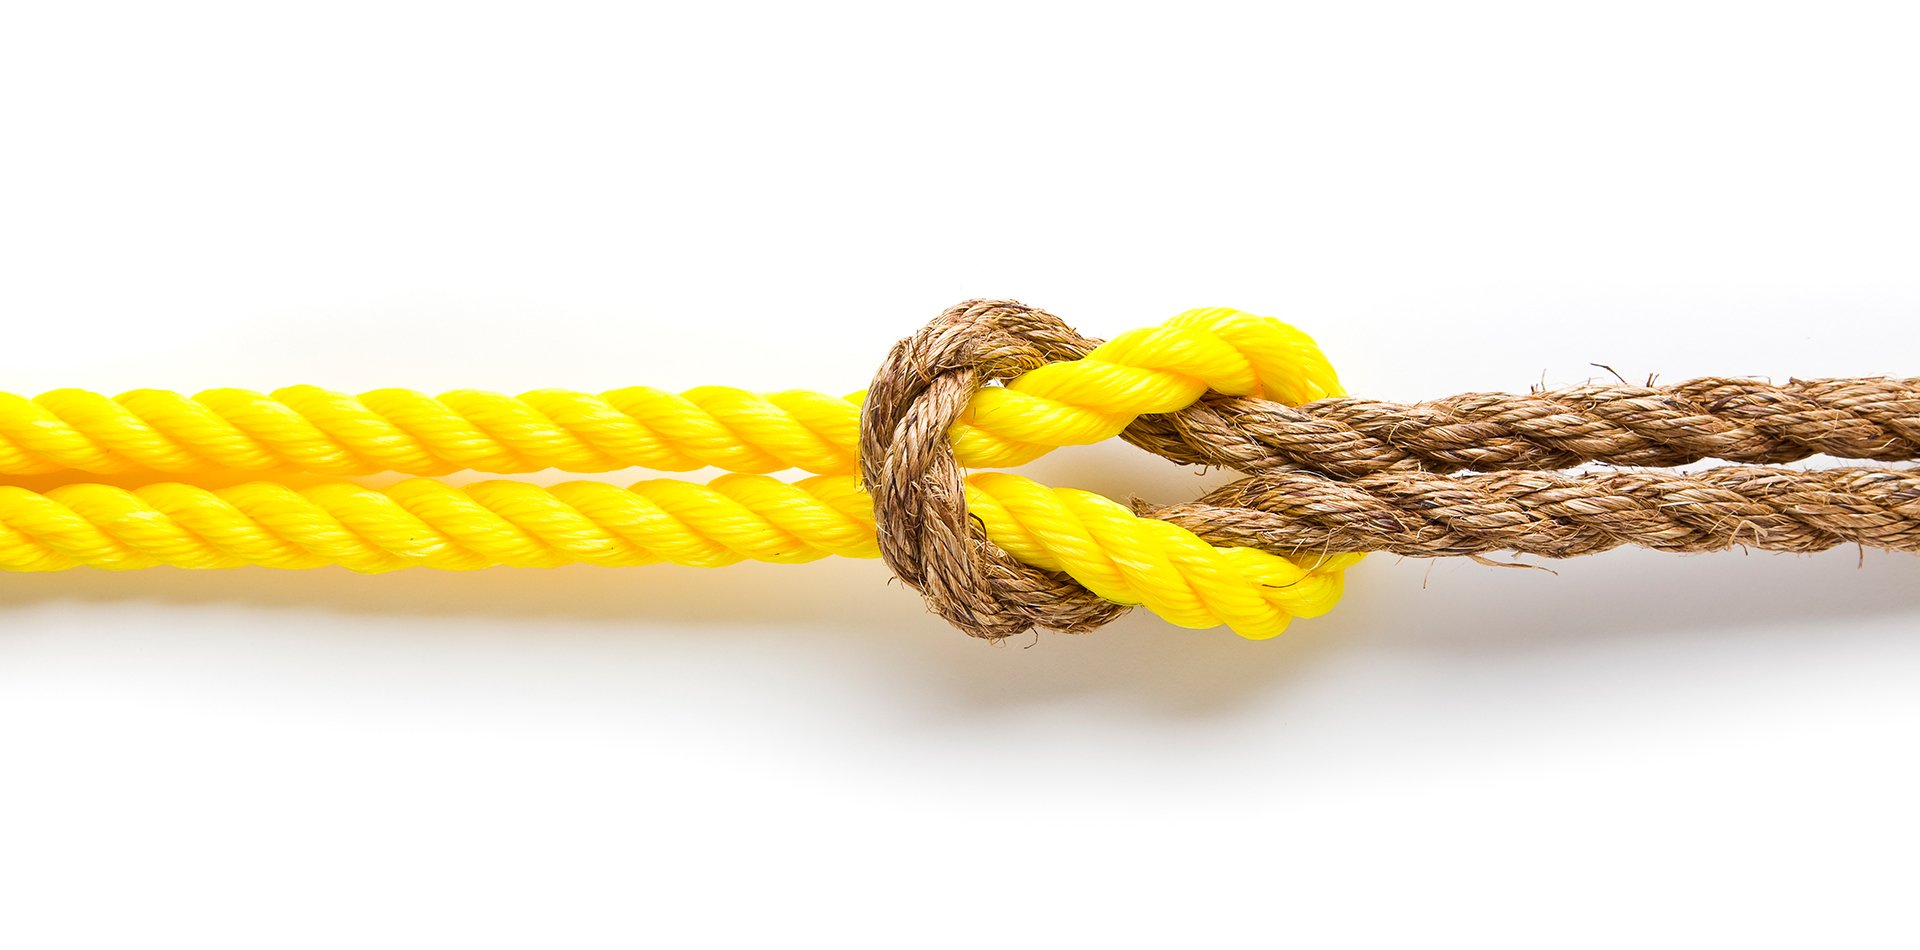 Agency employee assessment: New Rope or Wet Twine?